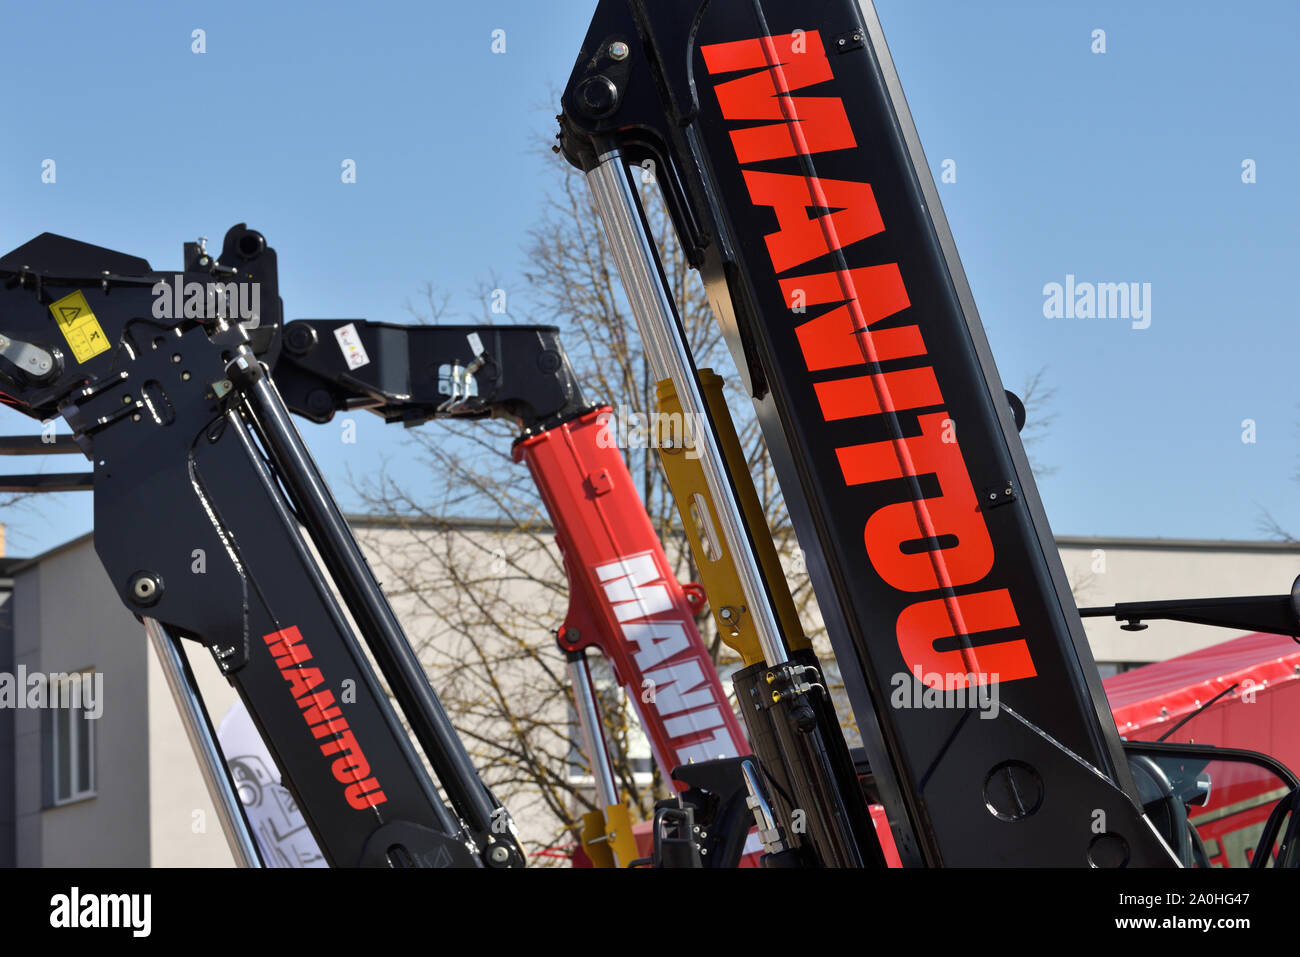 Kaunas, Lithuania - April 04: Manitou forklift tractor detail and logo in Kaunas on April 04, 2019. Manitou is a firm that makes fork lifts, cherry pi Stock Photo